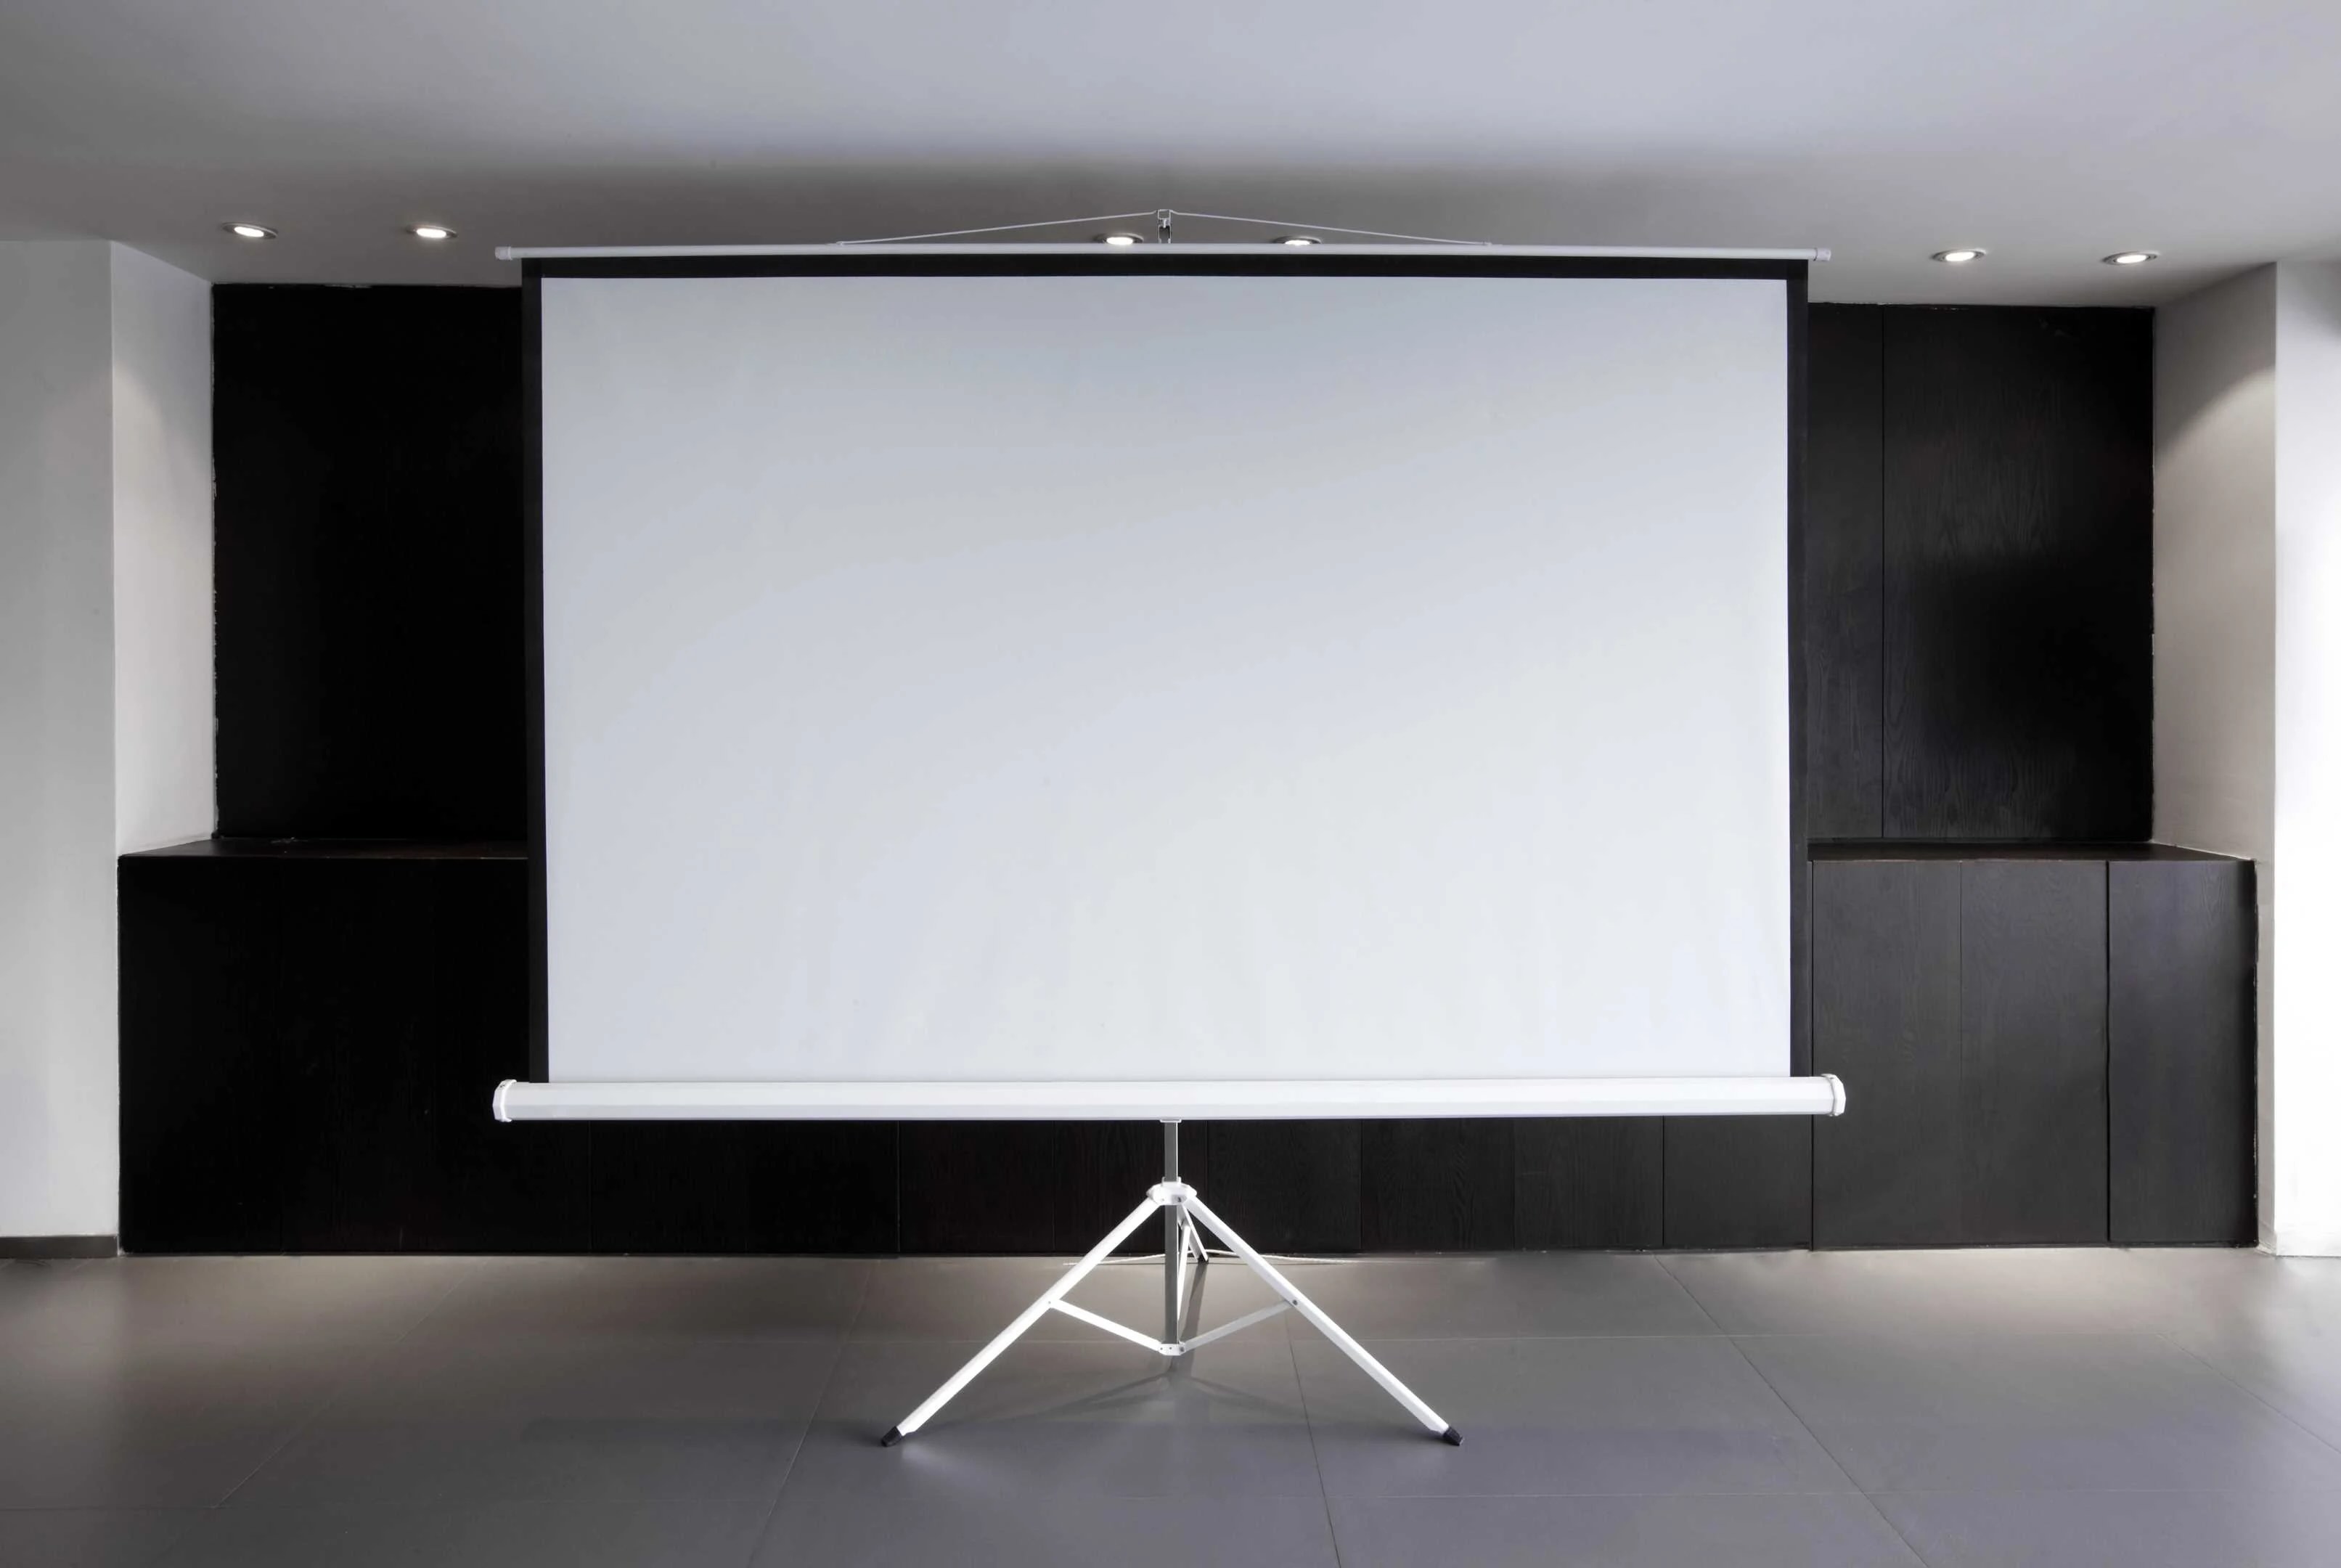 How to Make a Screen for a Projector? in 2023